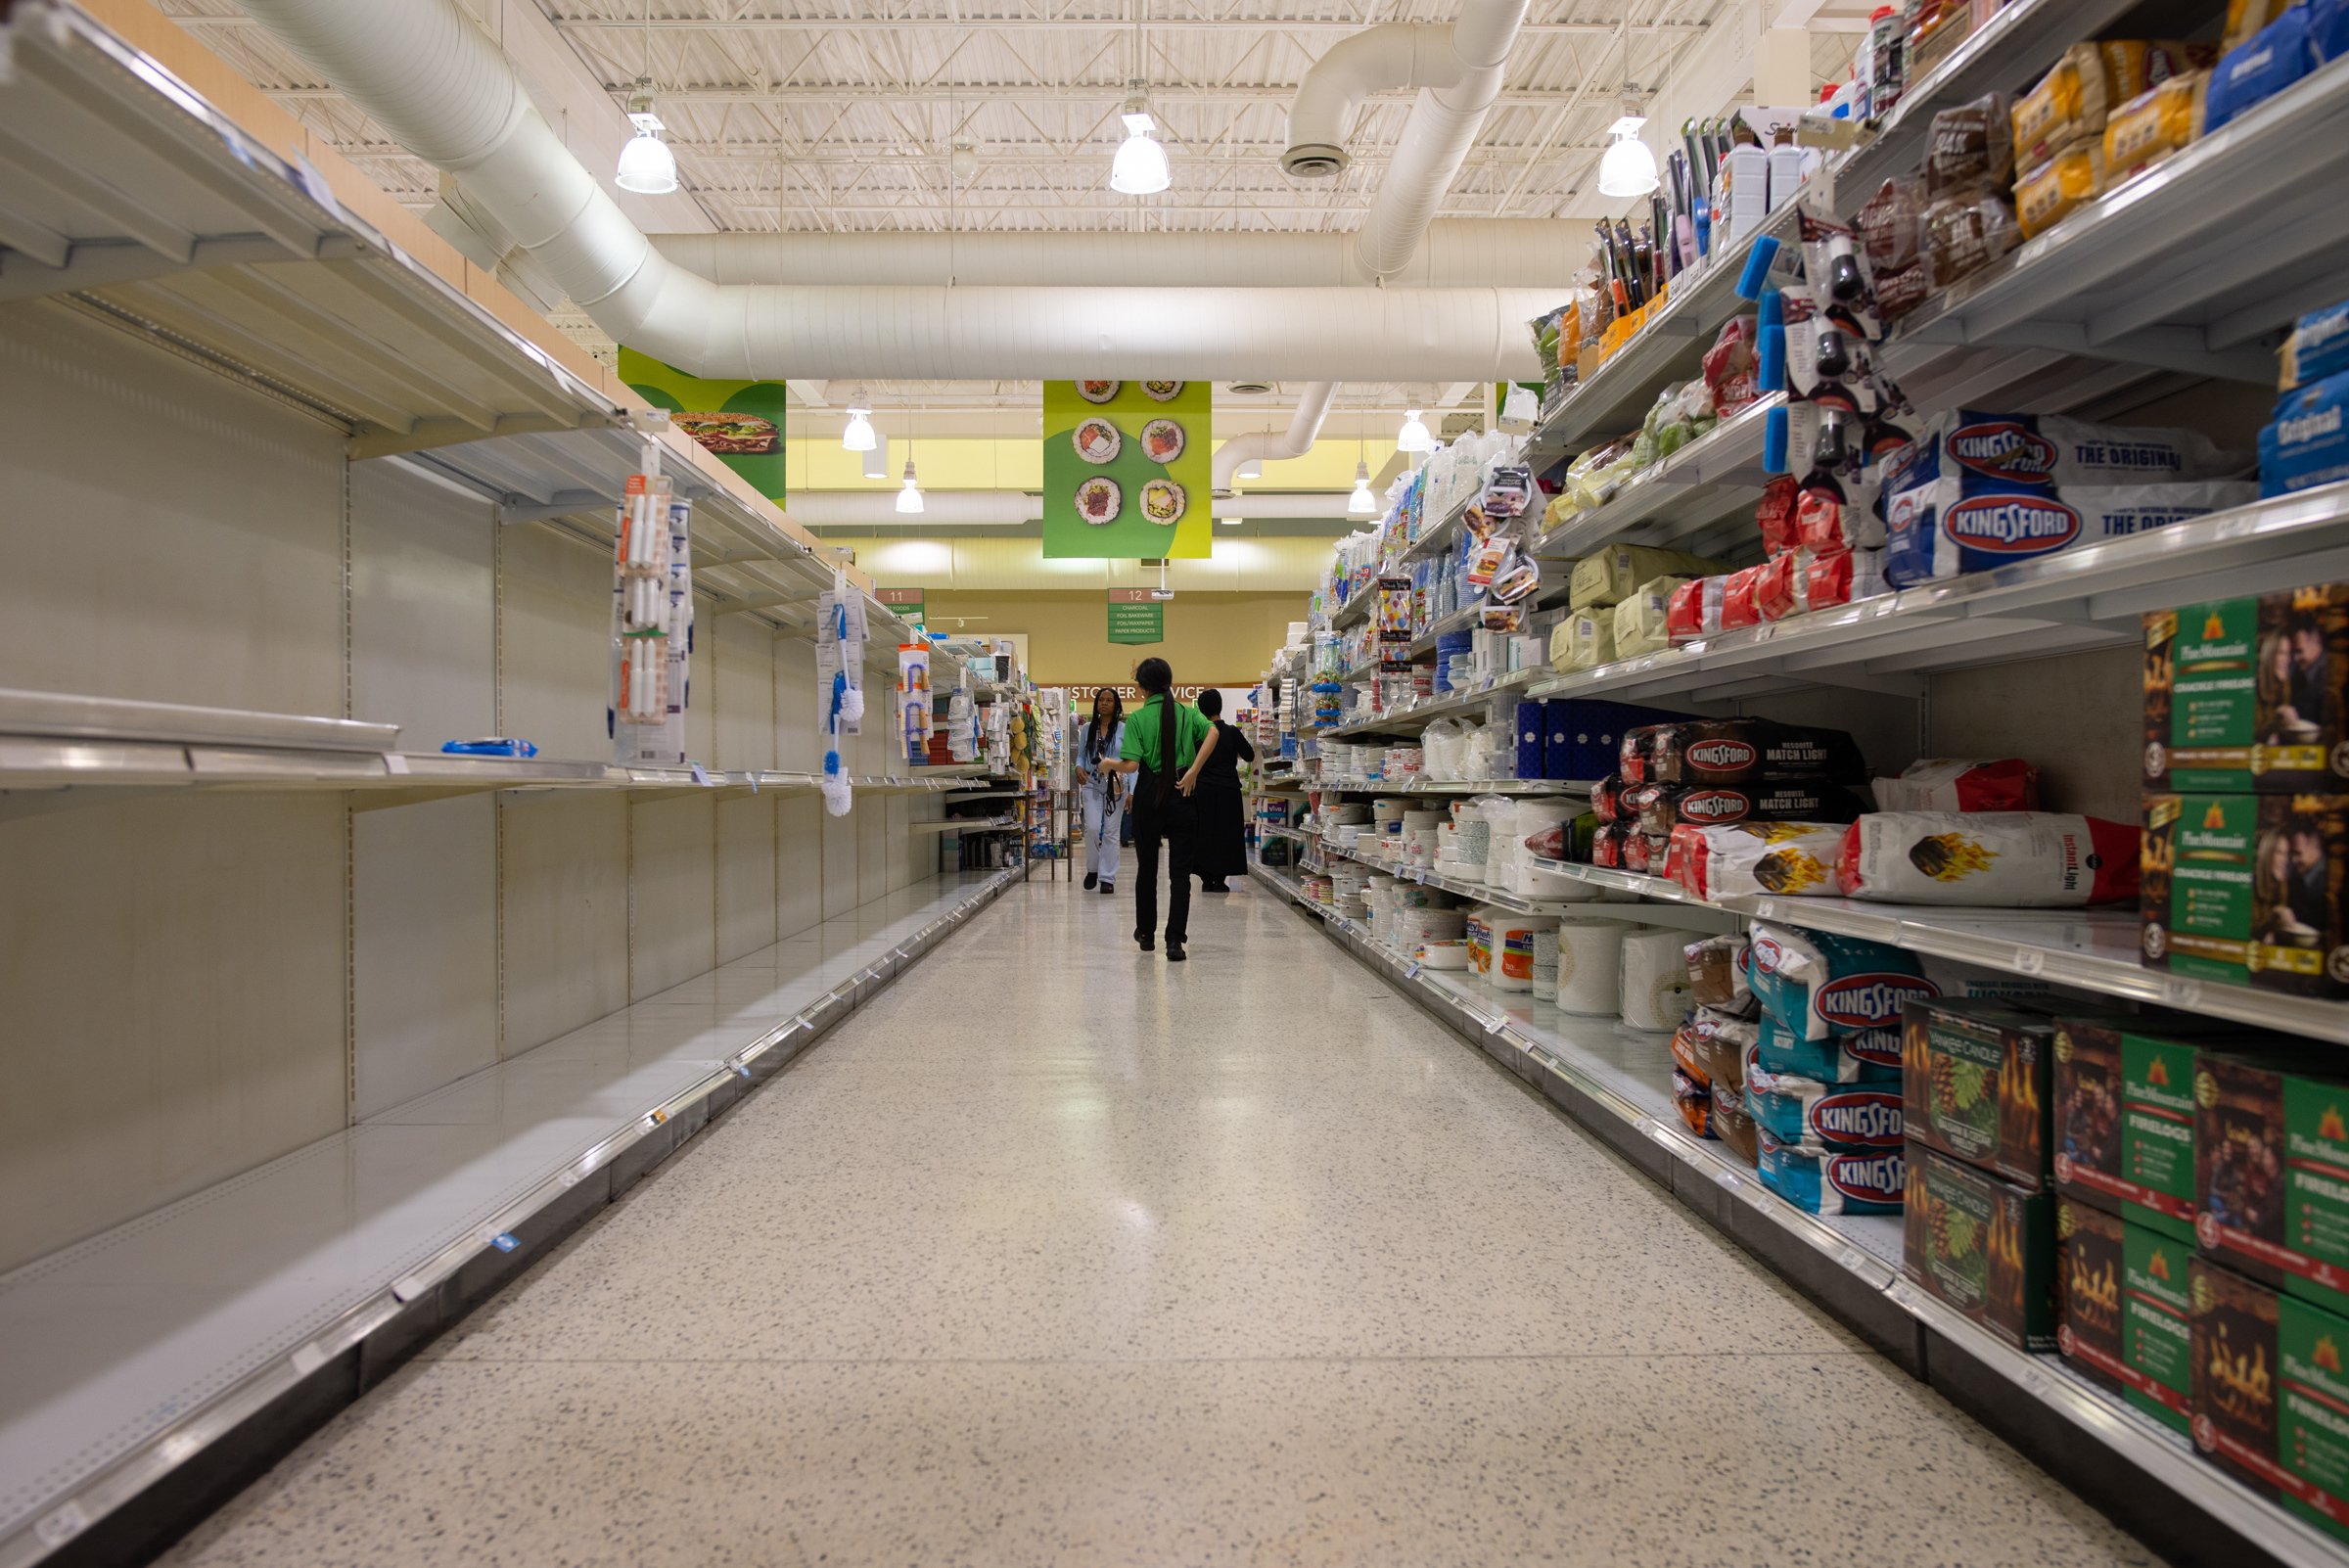  Shelves are depleted of paper products on Saturday, March 14, 2020, at the Atlanta Highway Publix in Athens, Georgia. The COVID-19 pandemic and recent declaration of a national emergency by President Trump have caused a shopping frenzy as residents 